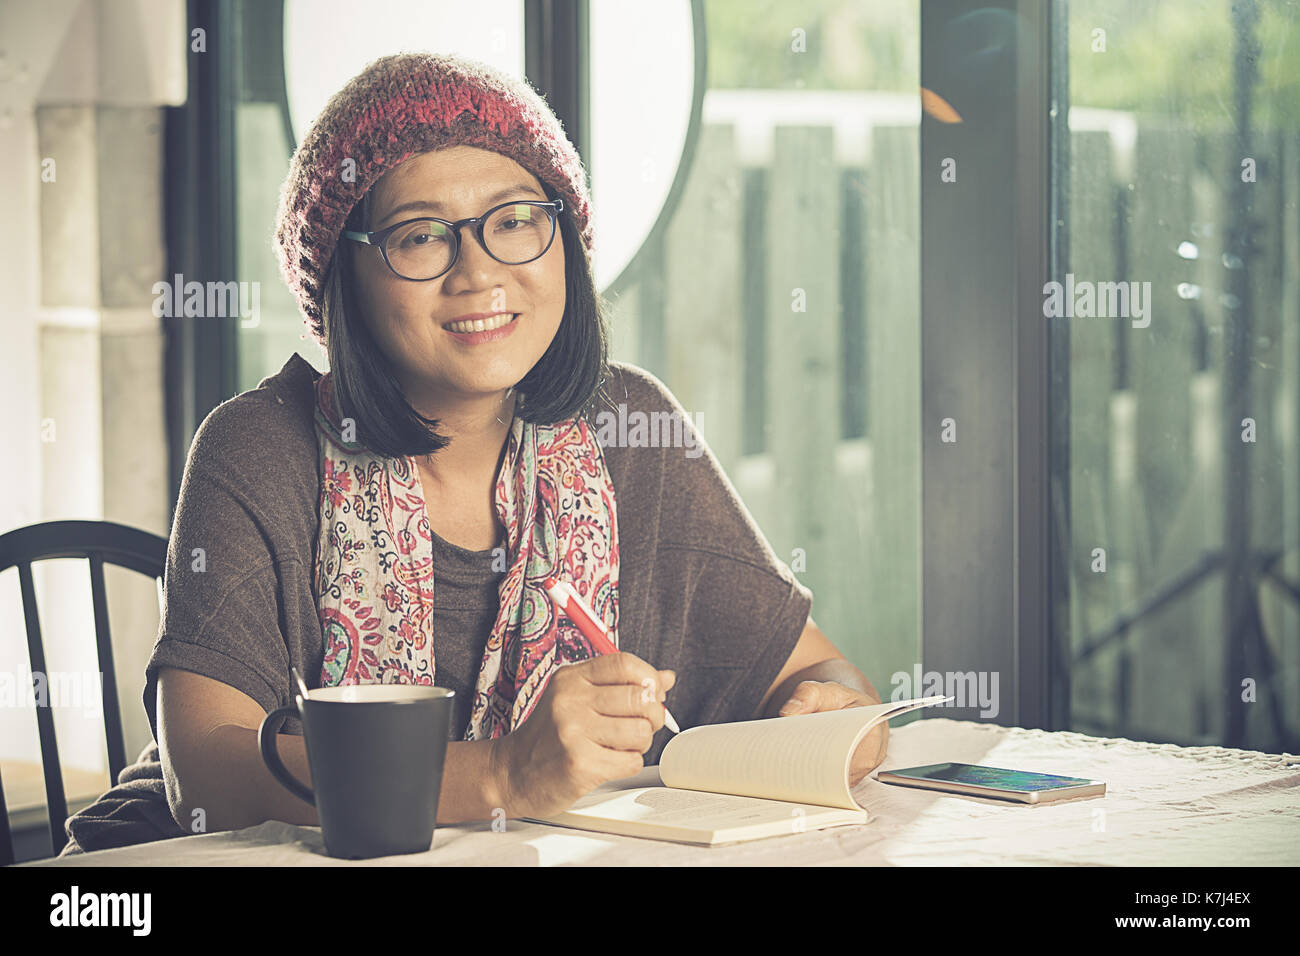 toothy smiling face of asian woman reading pocket book in coffee shop Stock Photo